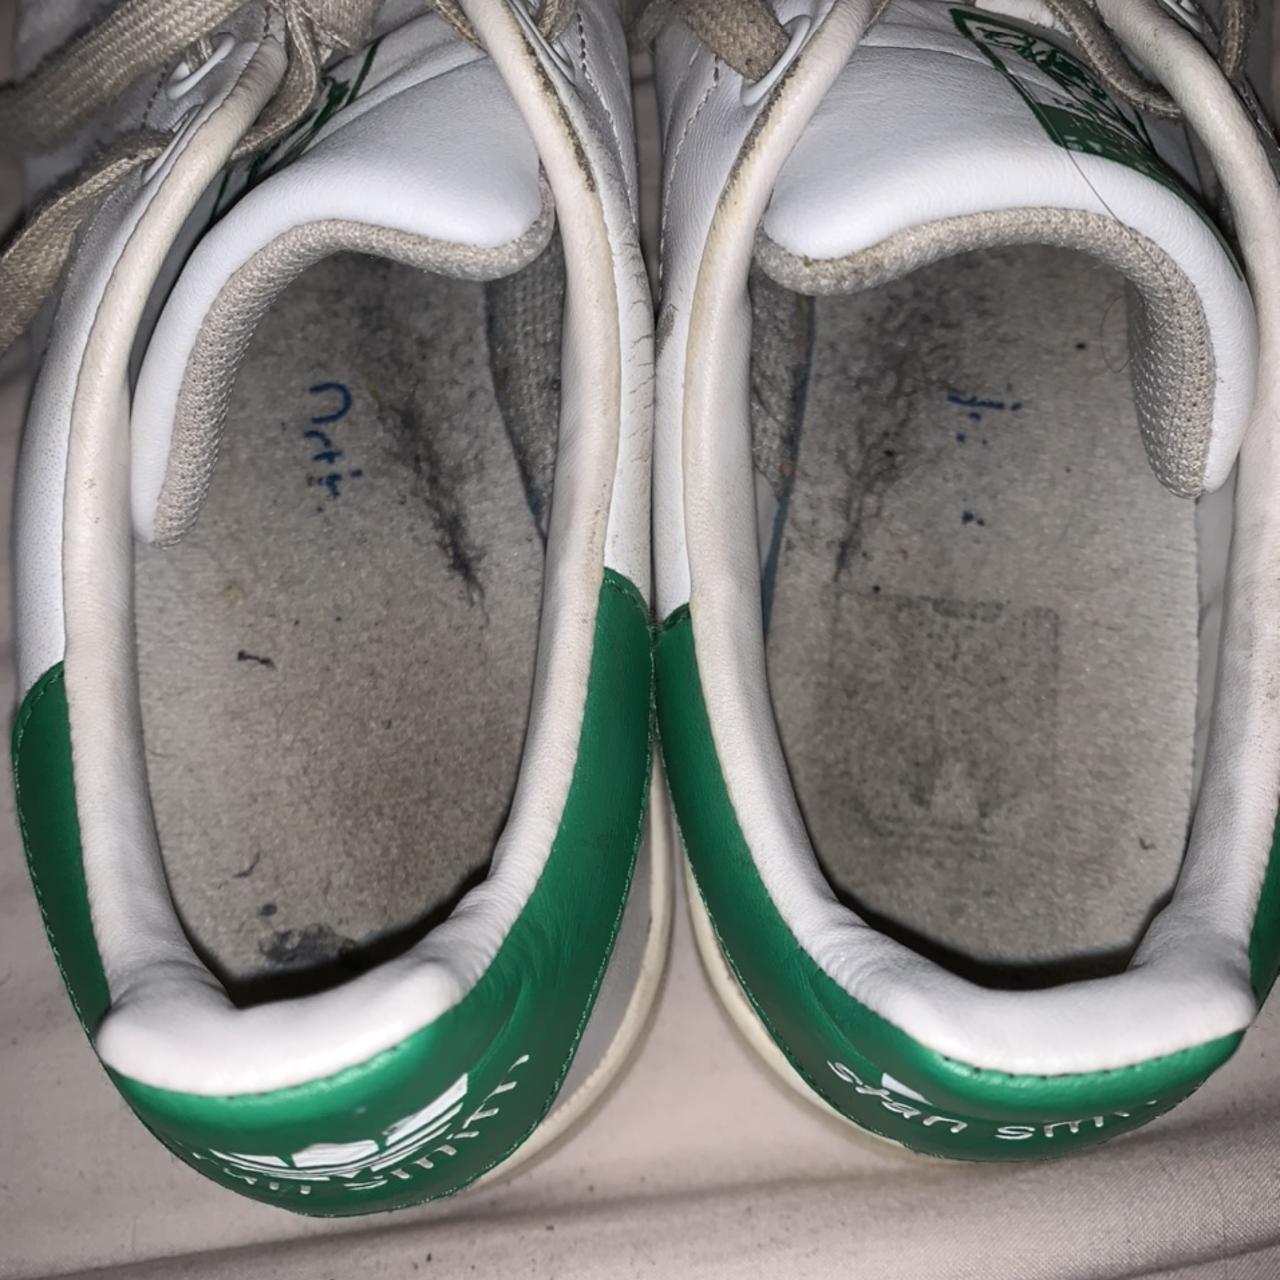 Pre-loved Adidas Stan Smiths white and green UK 5.5... - Depop